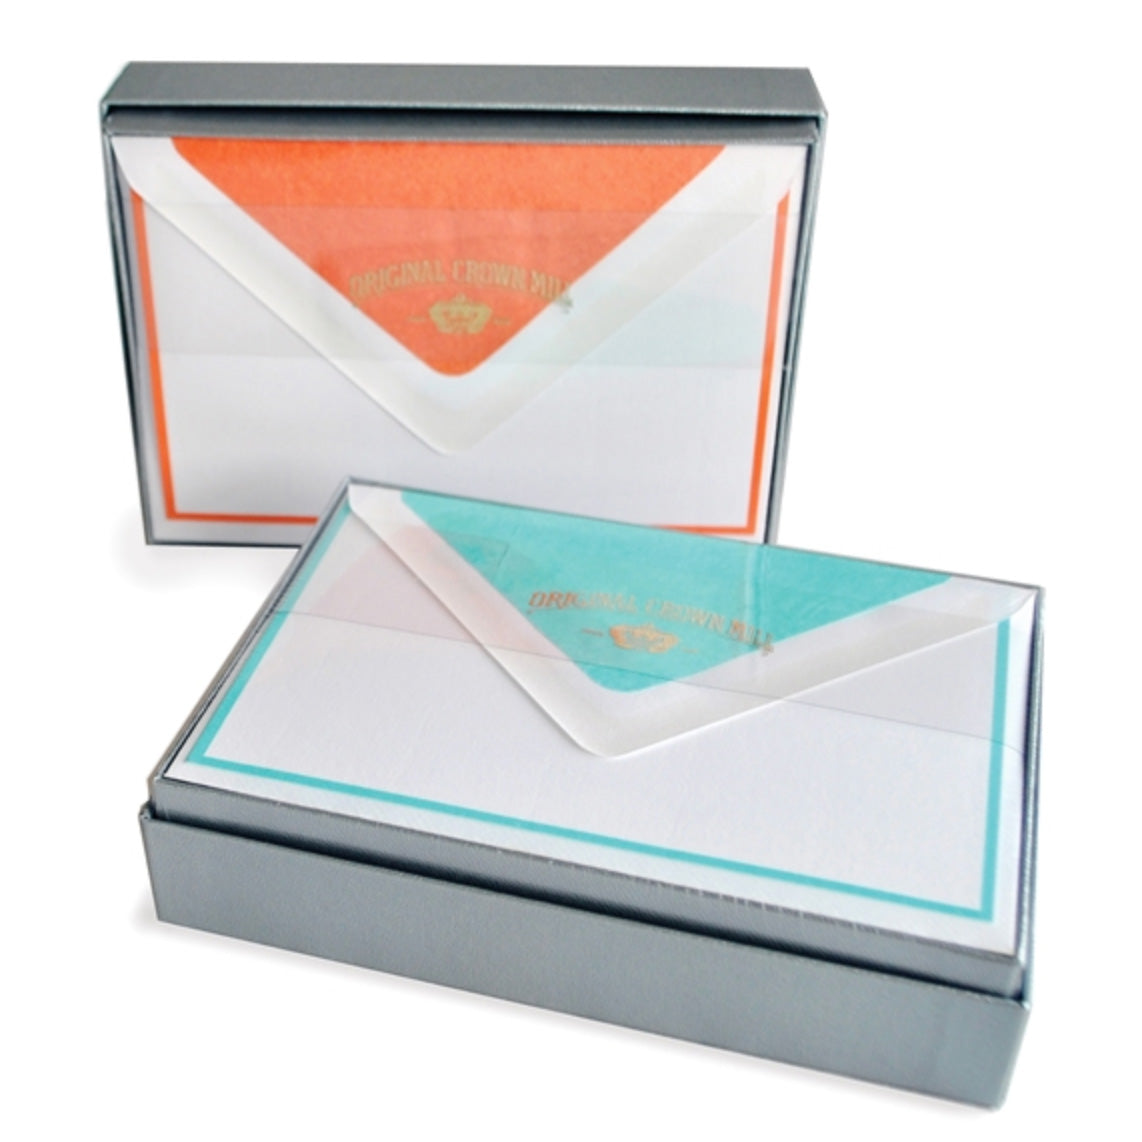 Original Crown Mill Bi-Color Note Card Letter Set Teal and orange fountain pen friendly